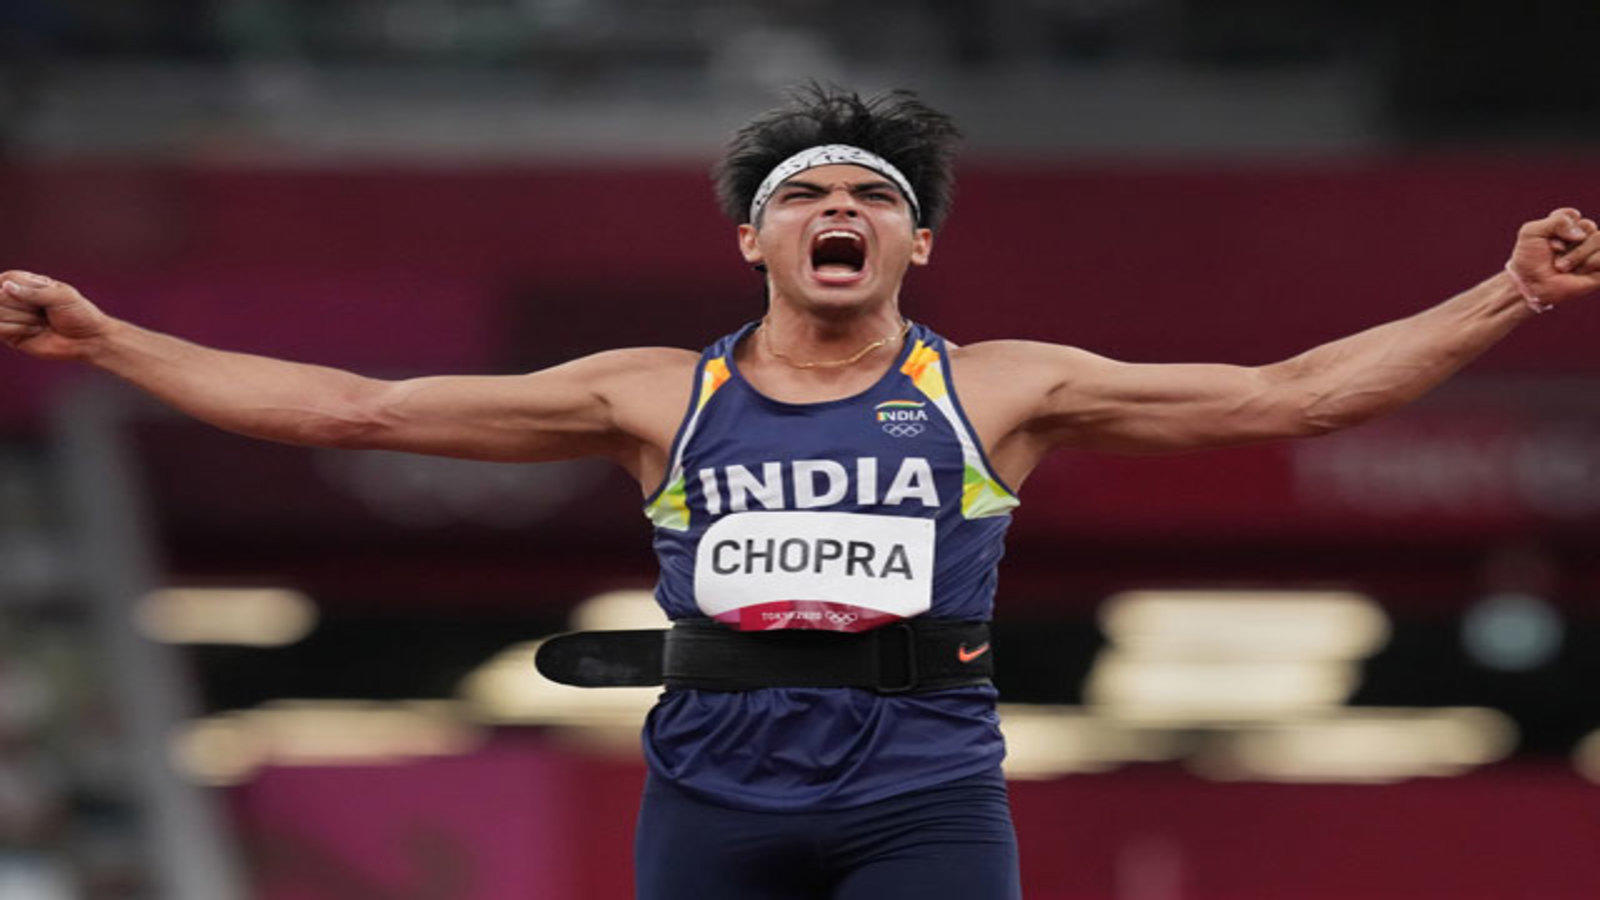 Tokyo Olympics 2020: Neeraj Chopra wins historic Gold in javelin throw, India's first athletics medal in 100 yrs Economic Times Video